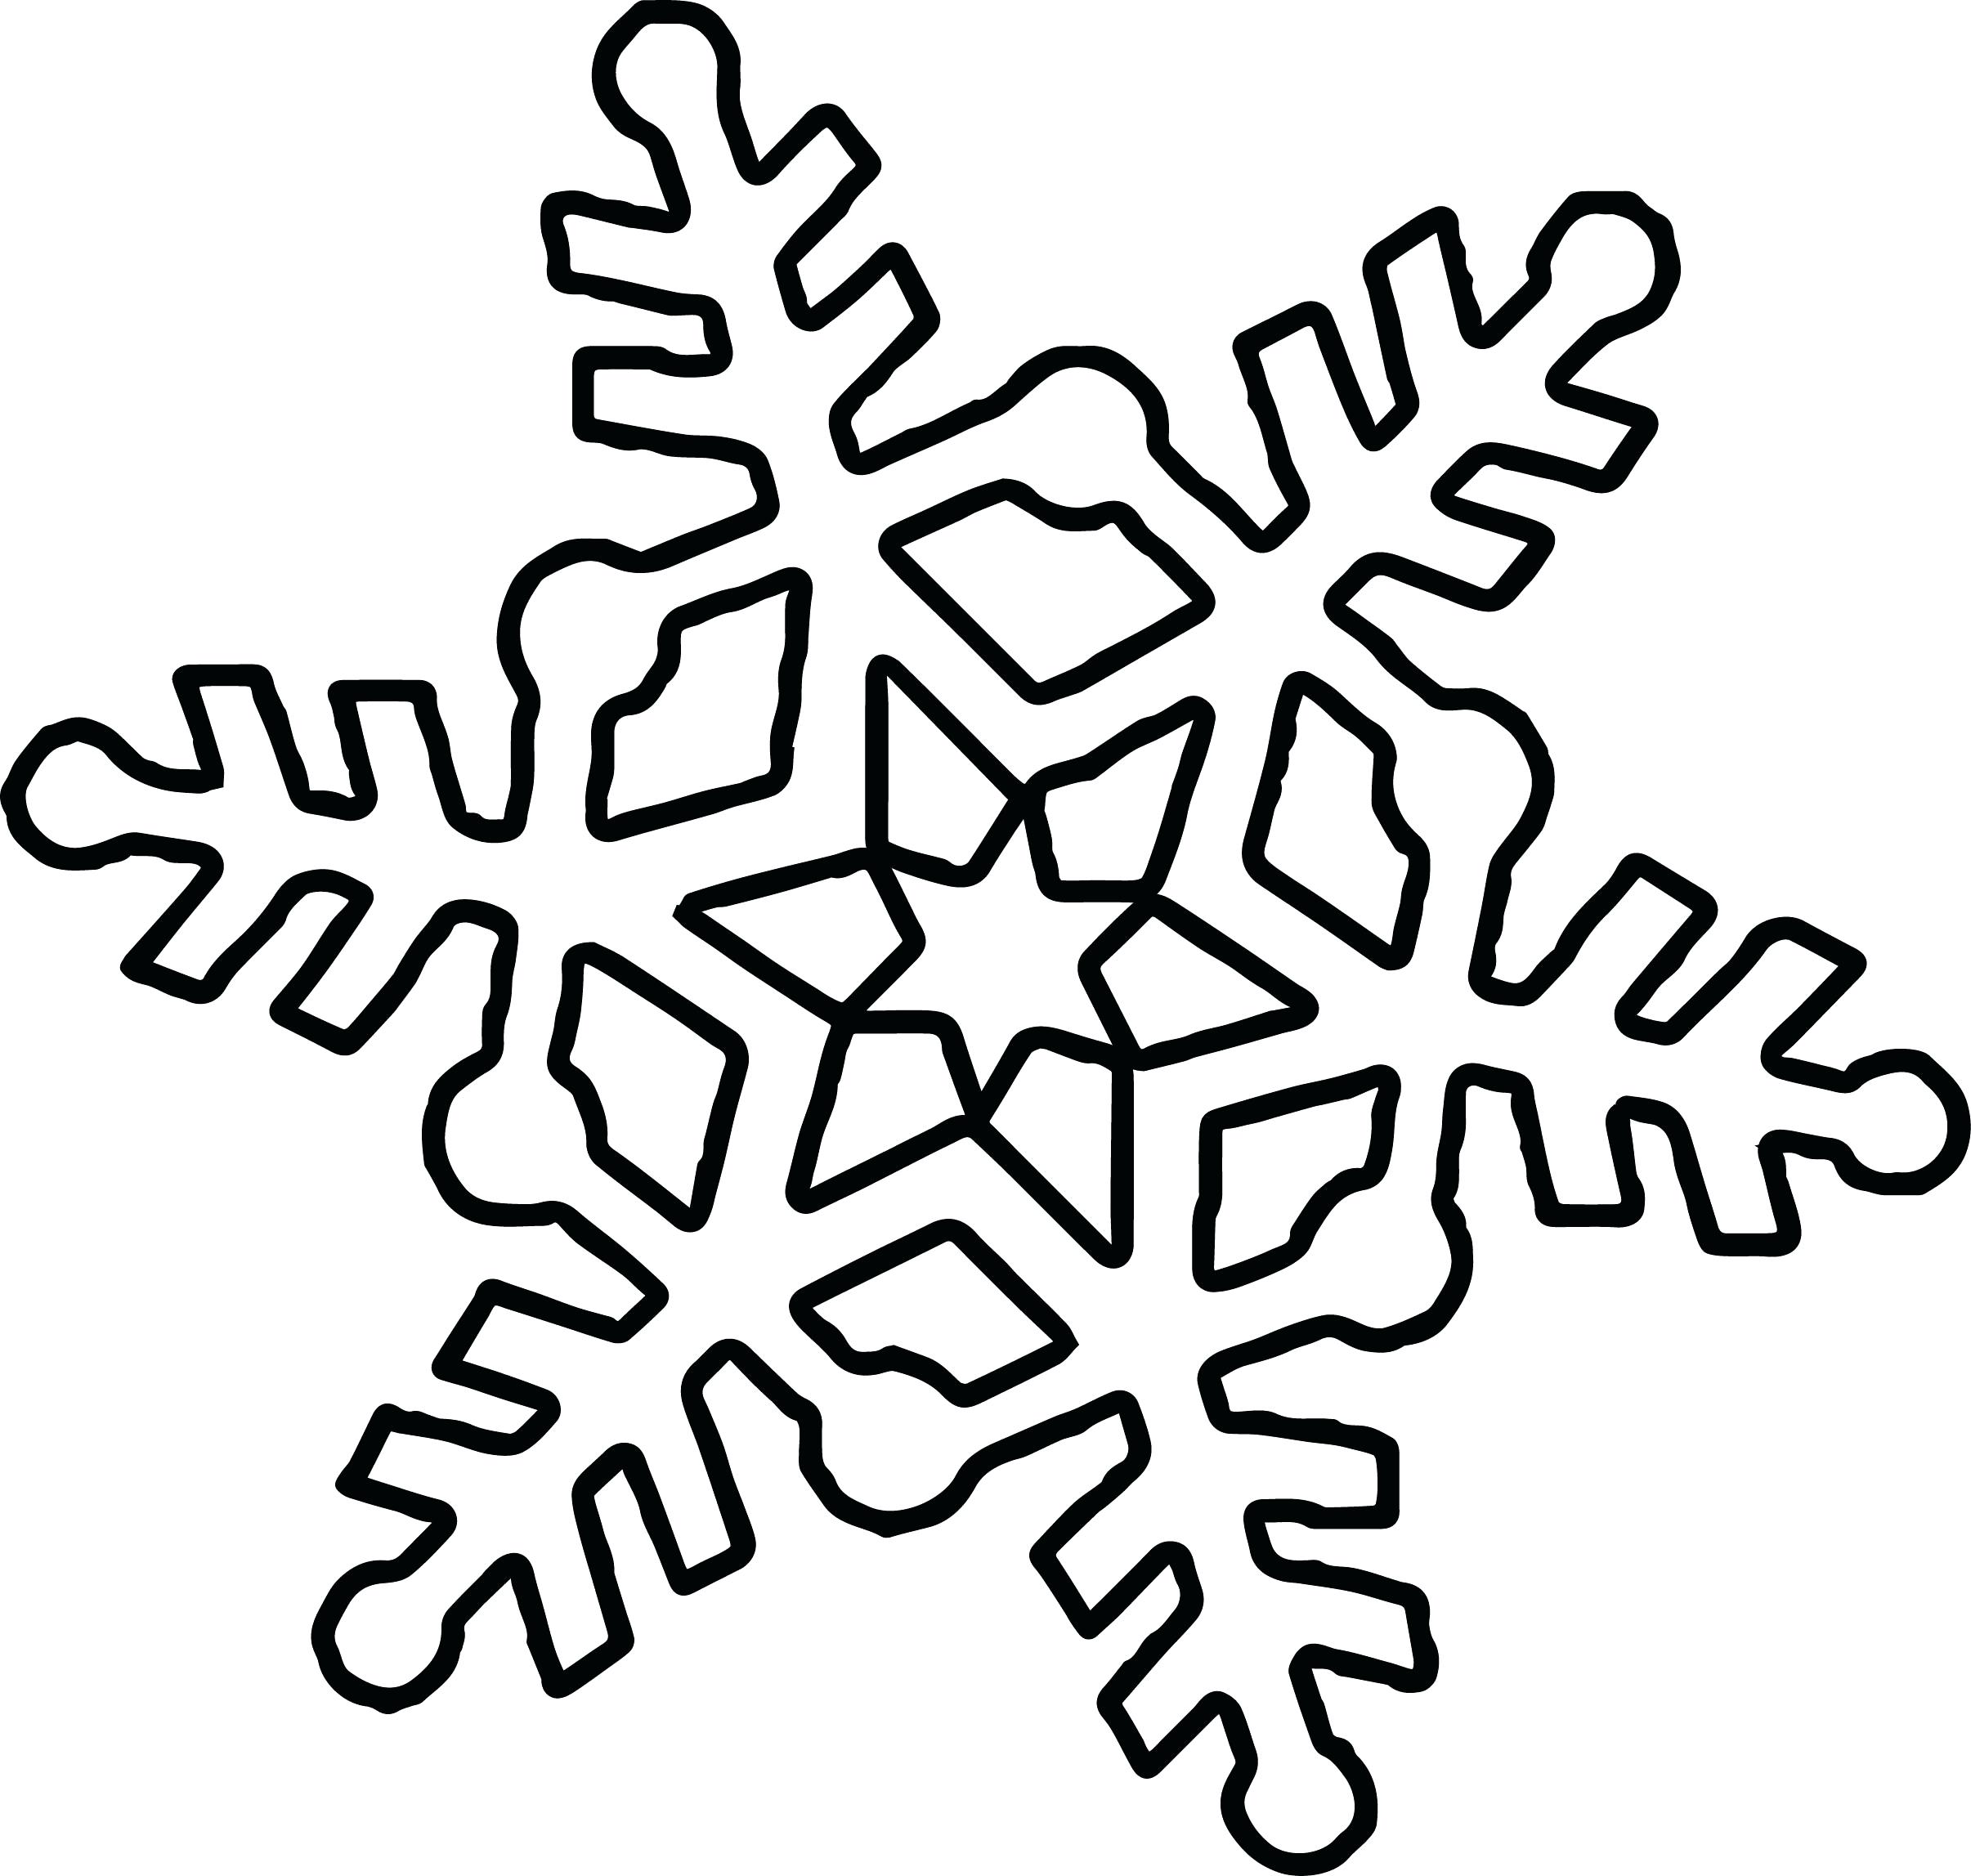 Snowflake Coloring Page Free download on ClipArtMag